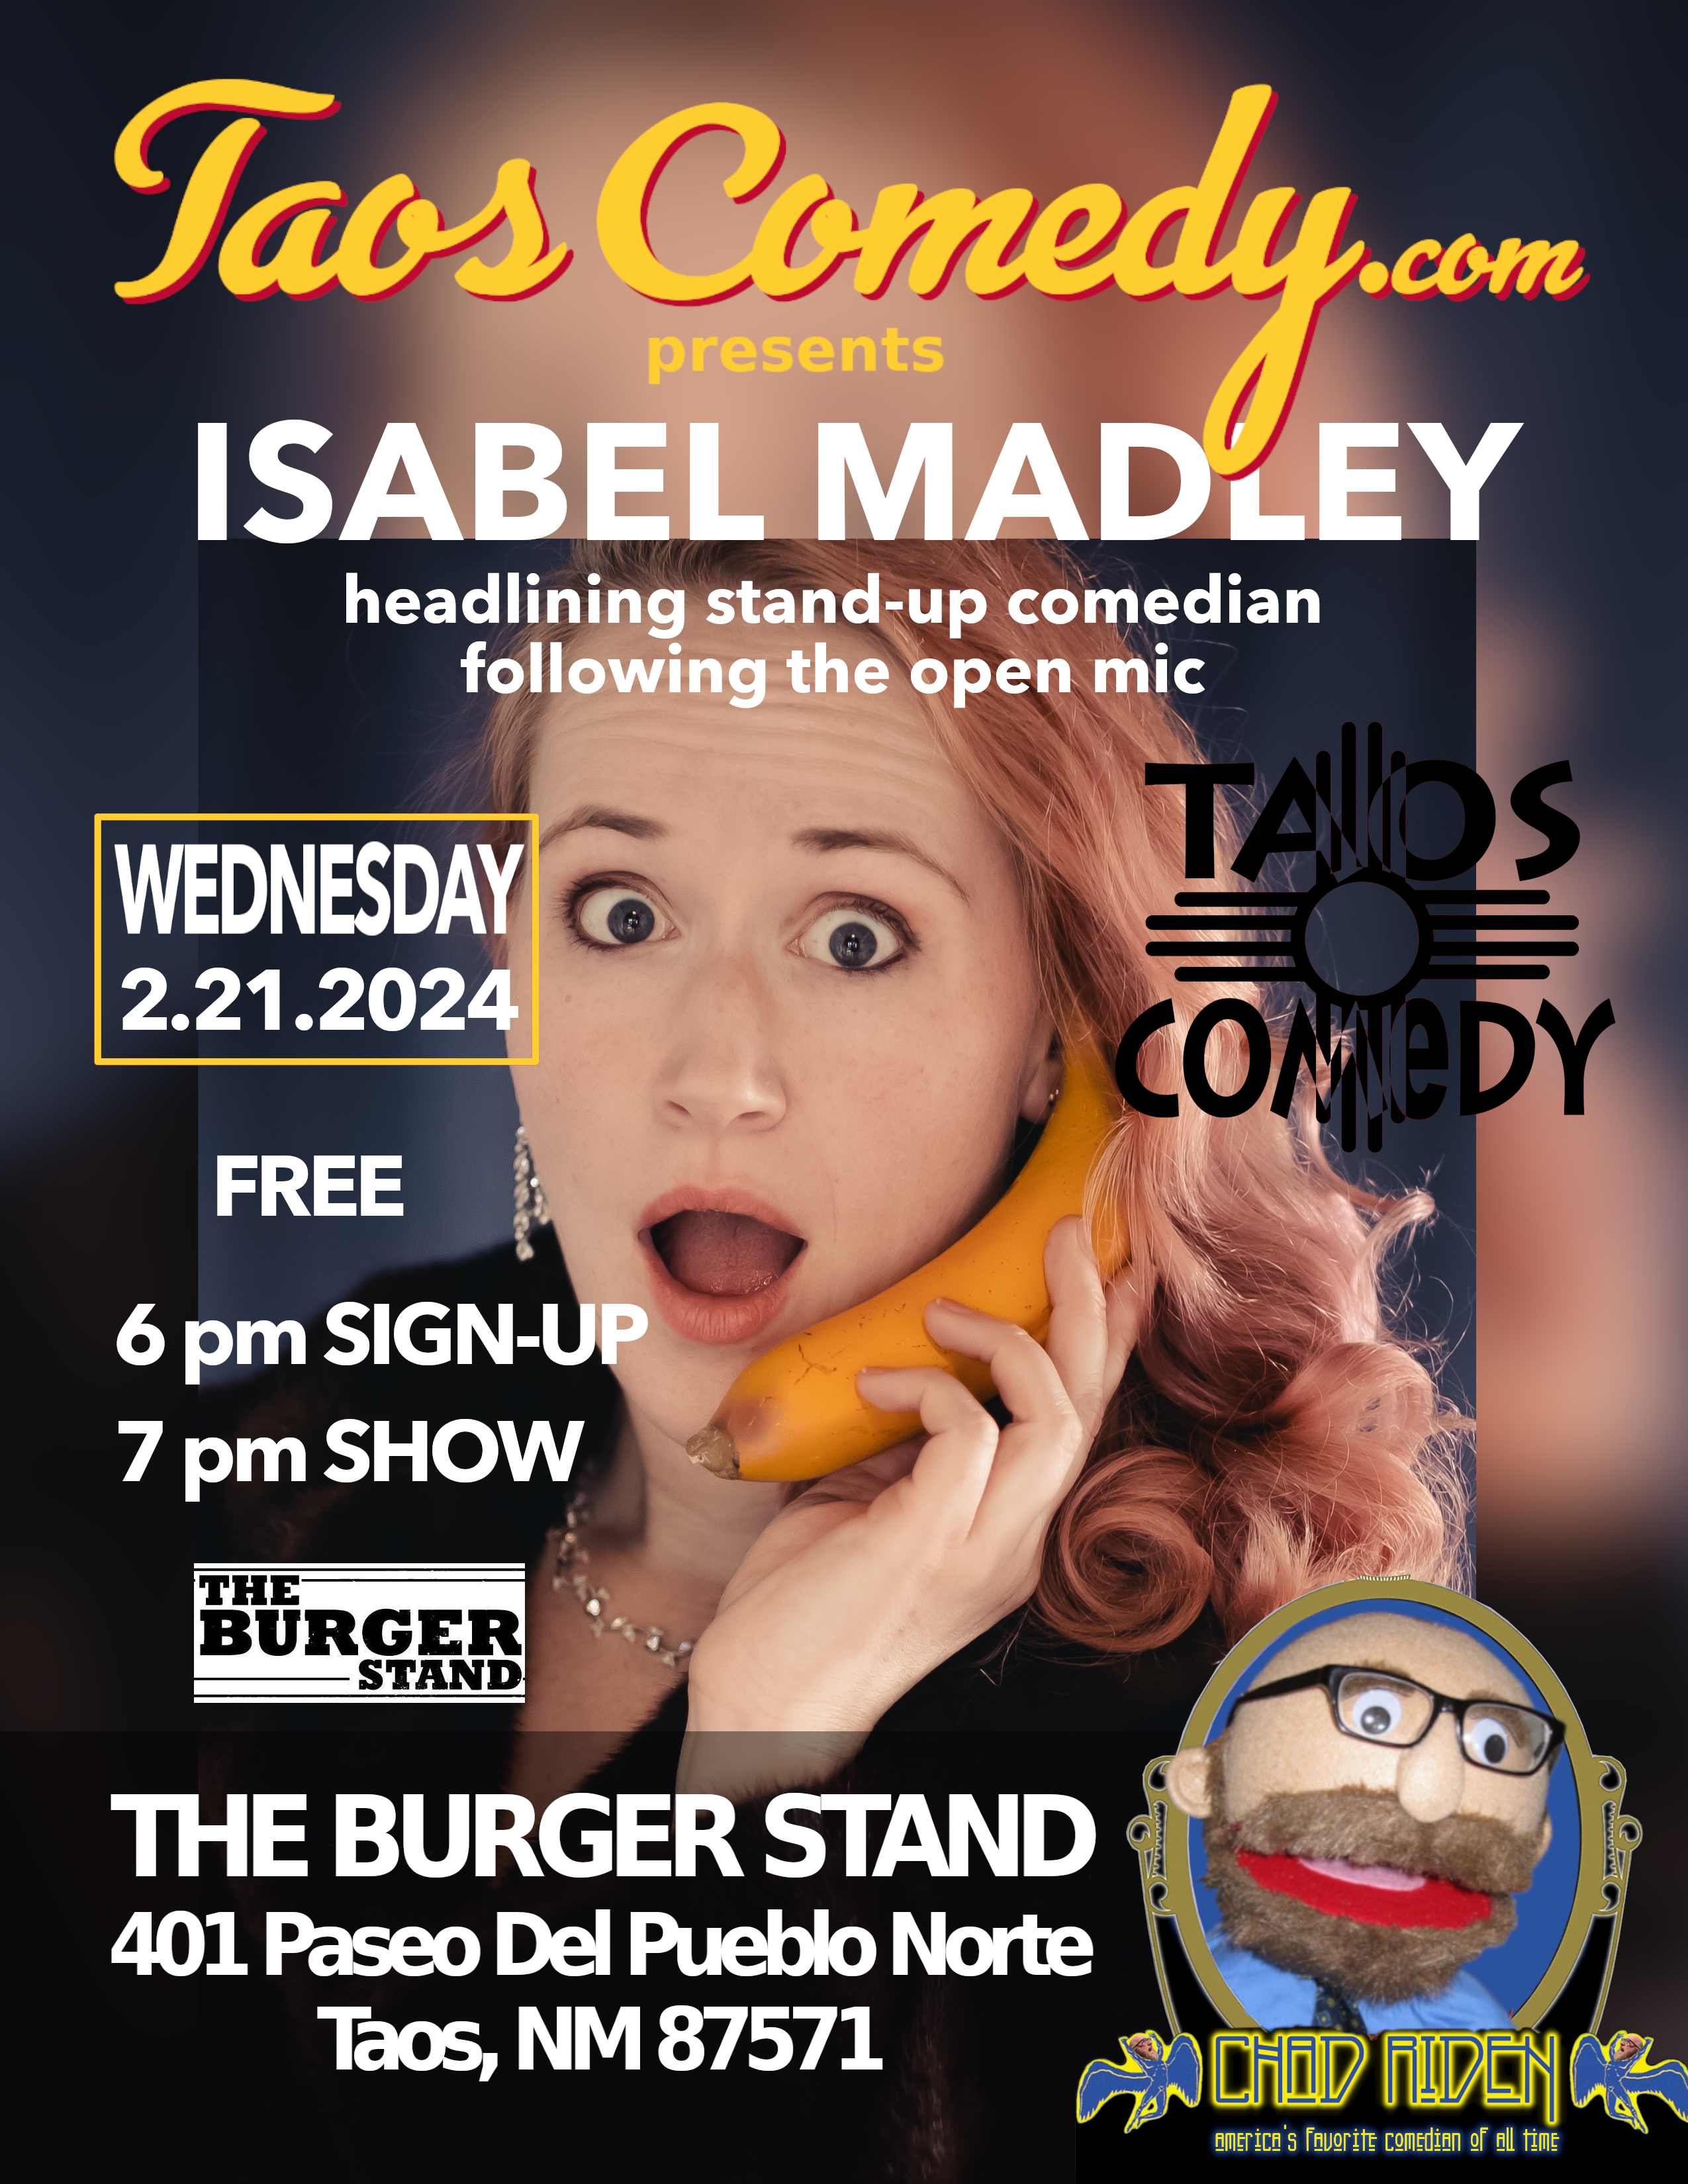 Isabel Madley headlines The Burger Stand 2/21/2024 following the open mic